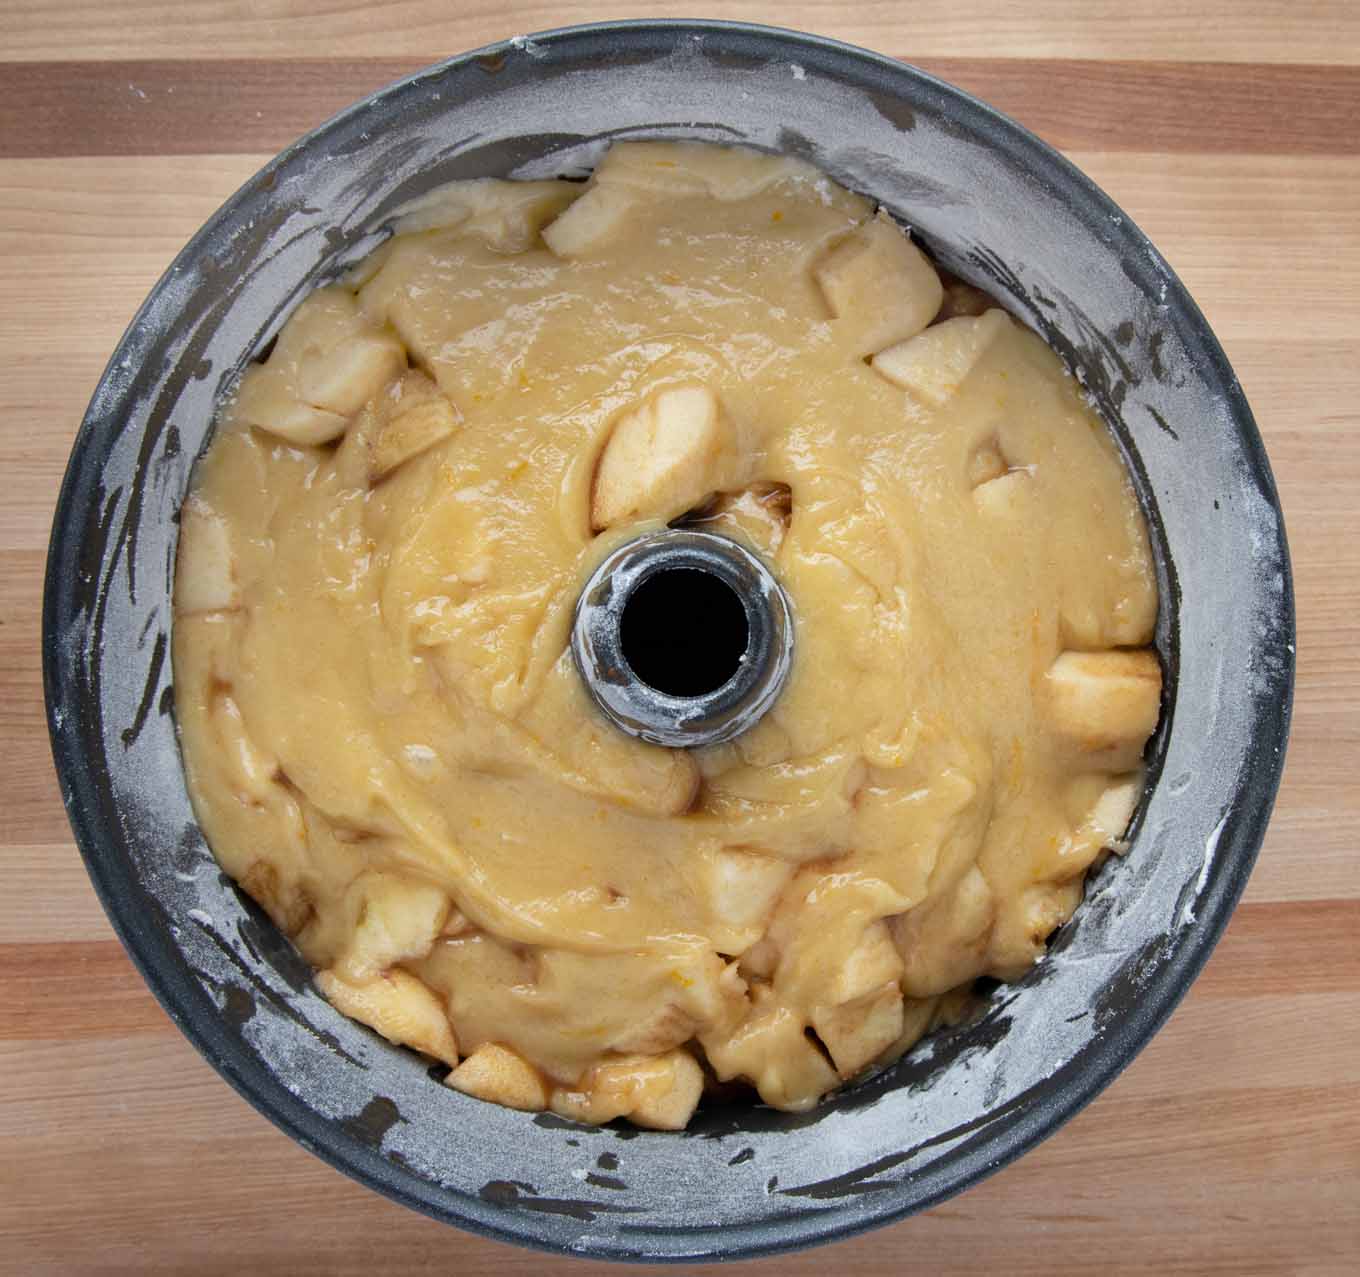 ring pan full of cake batter and apples that have been layered in the pan